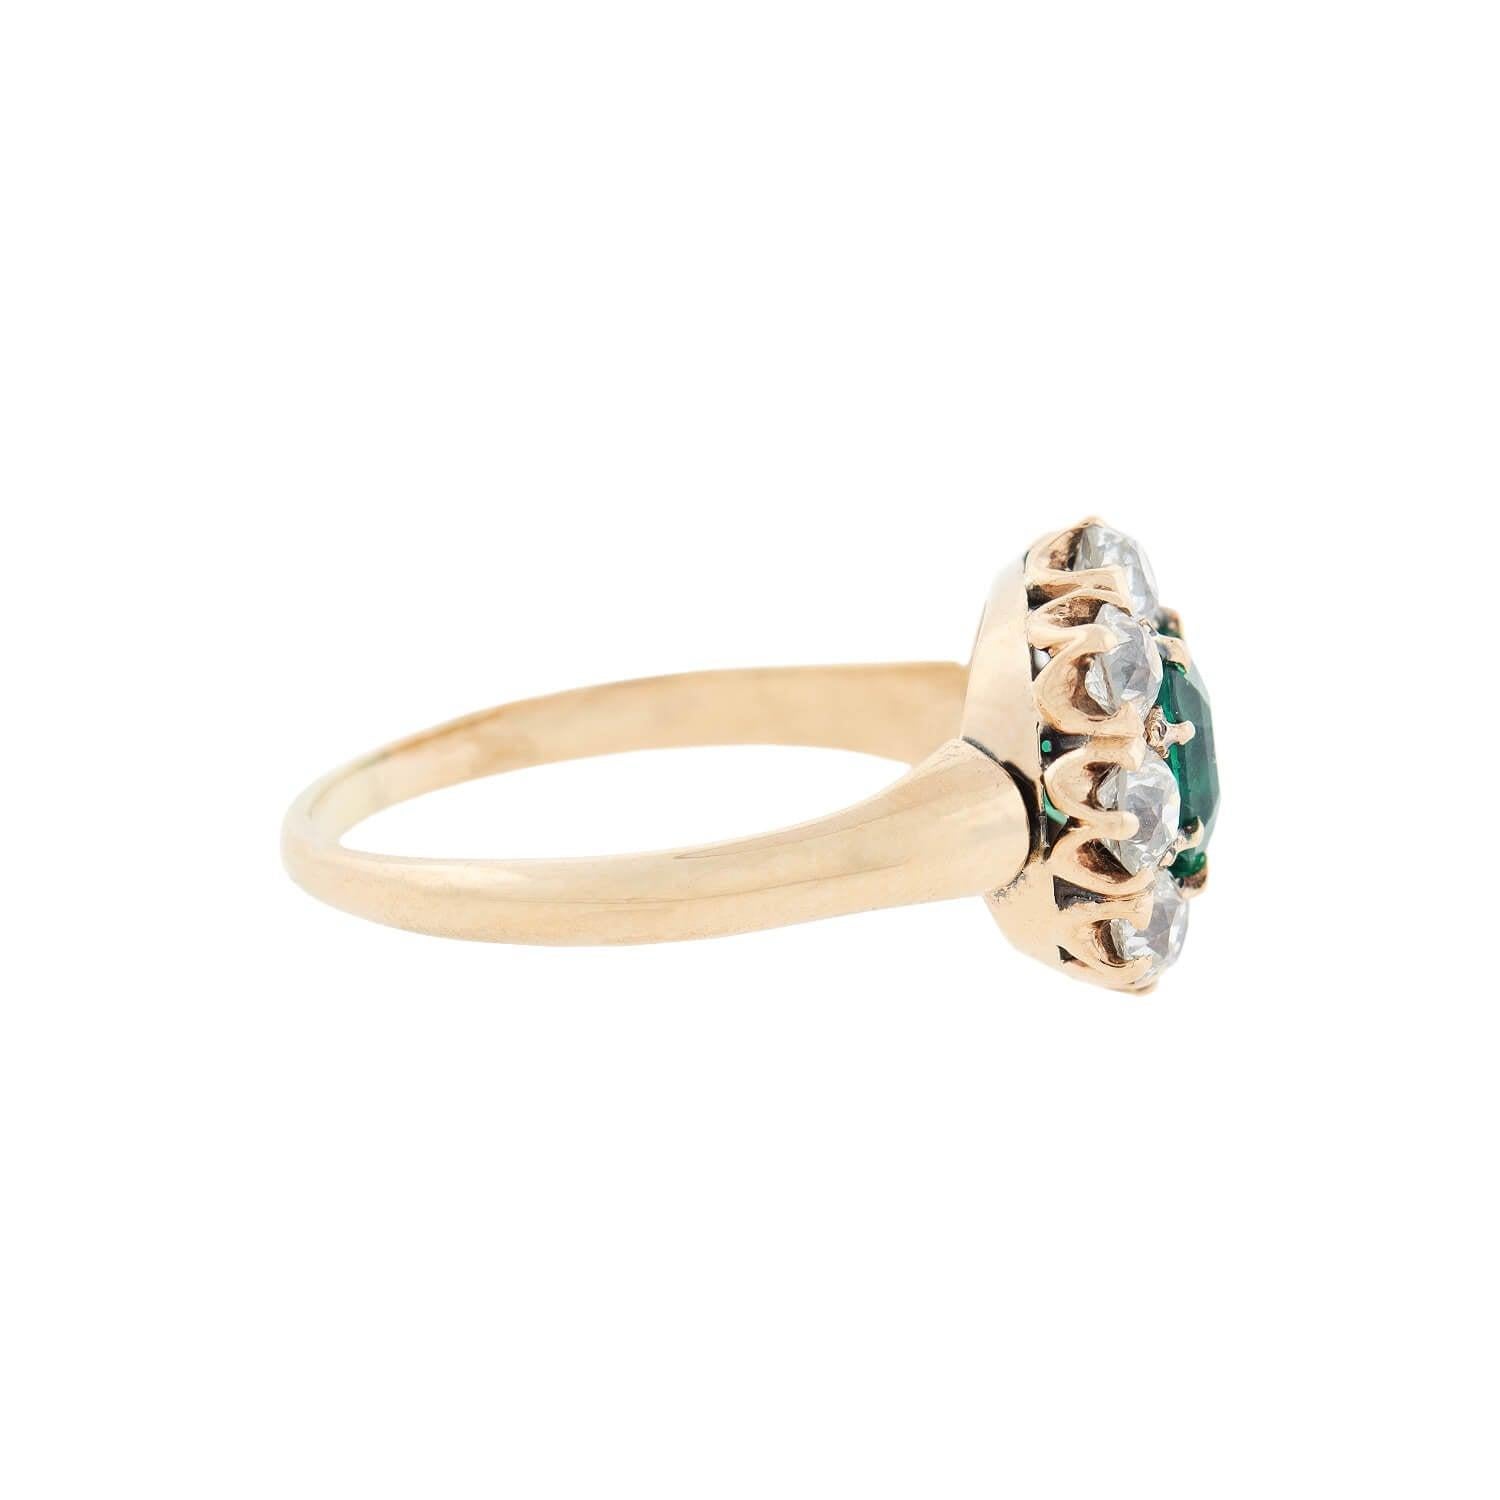 A stunning emerald and diamond ring from the Victorian (ca1880s) era! Crafted in 14kt yellow gold, this lovely piece is comprised of a vibrant Asscher Cut emerald stone surrounded by 8 sparkling Old Mine Cut diamonds for a lovely cluster effect. The